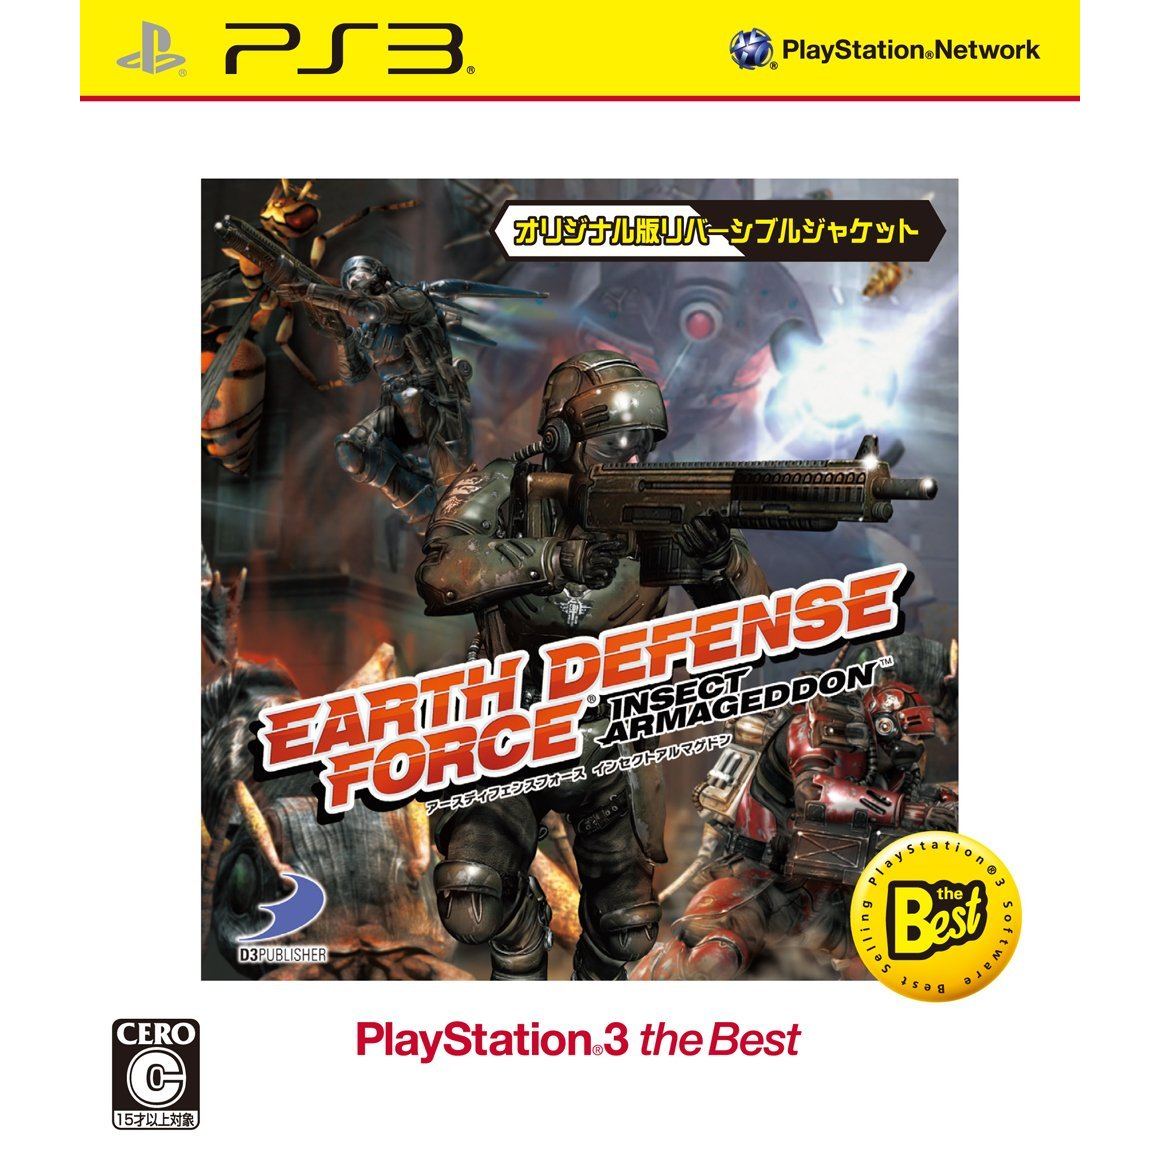 Earth Defense Force Insect Armageddon PlayStation3 the Best Version for PlayStation 3